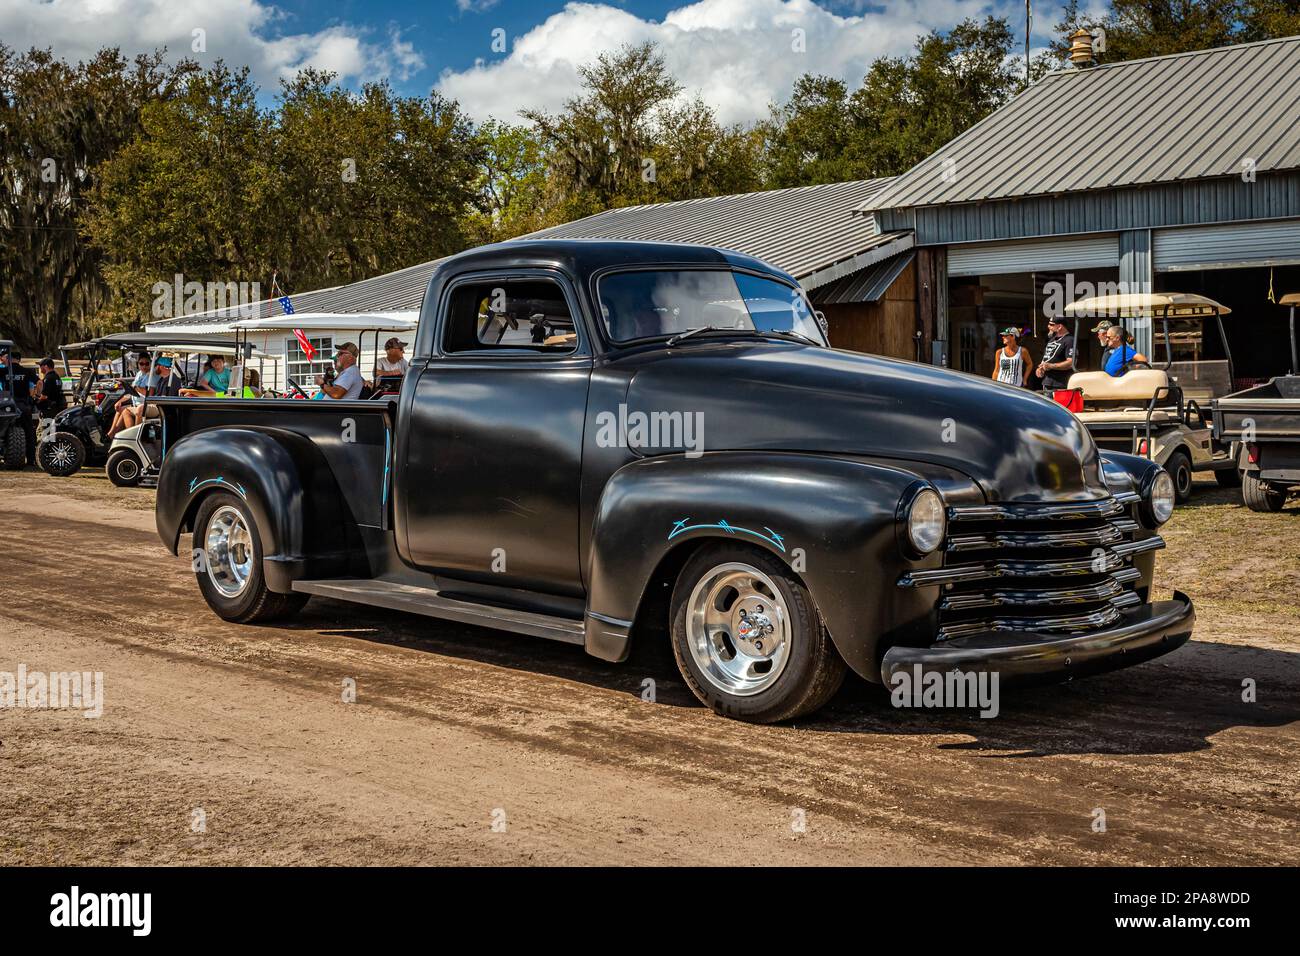 Fort Meade, FL - February 26, 2022: High perspective front corner view of a 1952 Chevrolet Advance Design 3100 Pickup truck at a local car show. Stock Photo